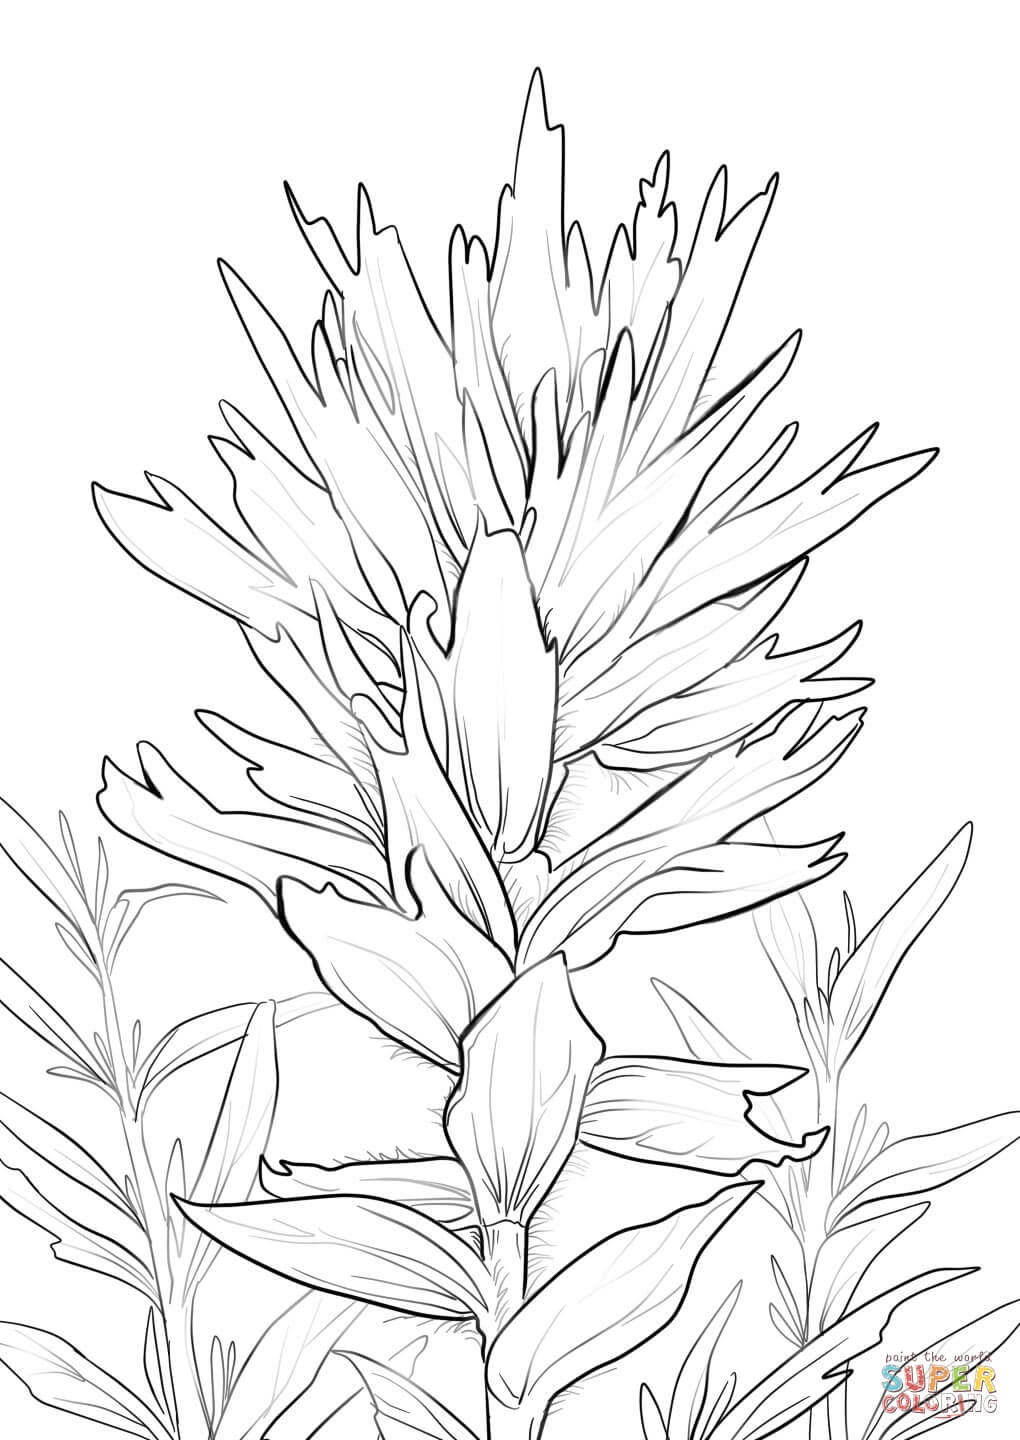 Wyoming indian paintbrush coloring page free printable coloring pages